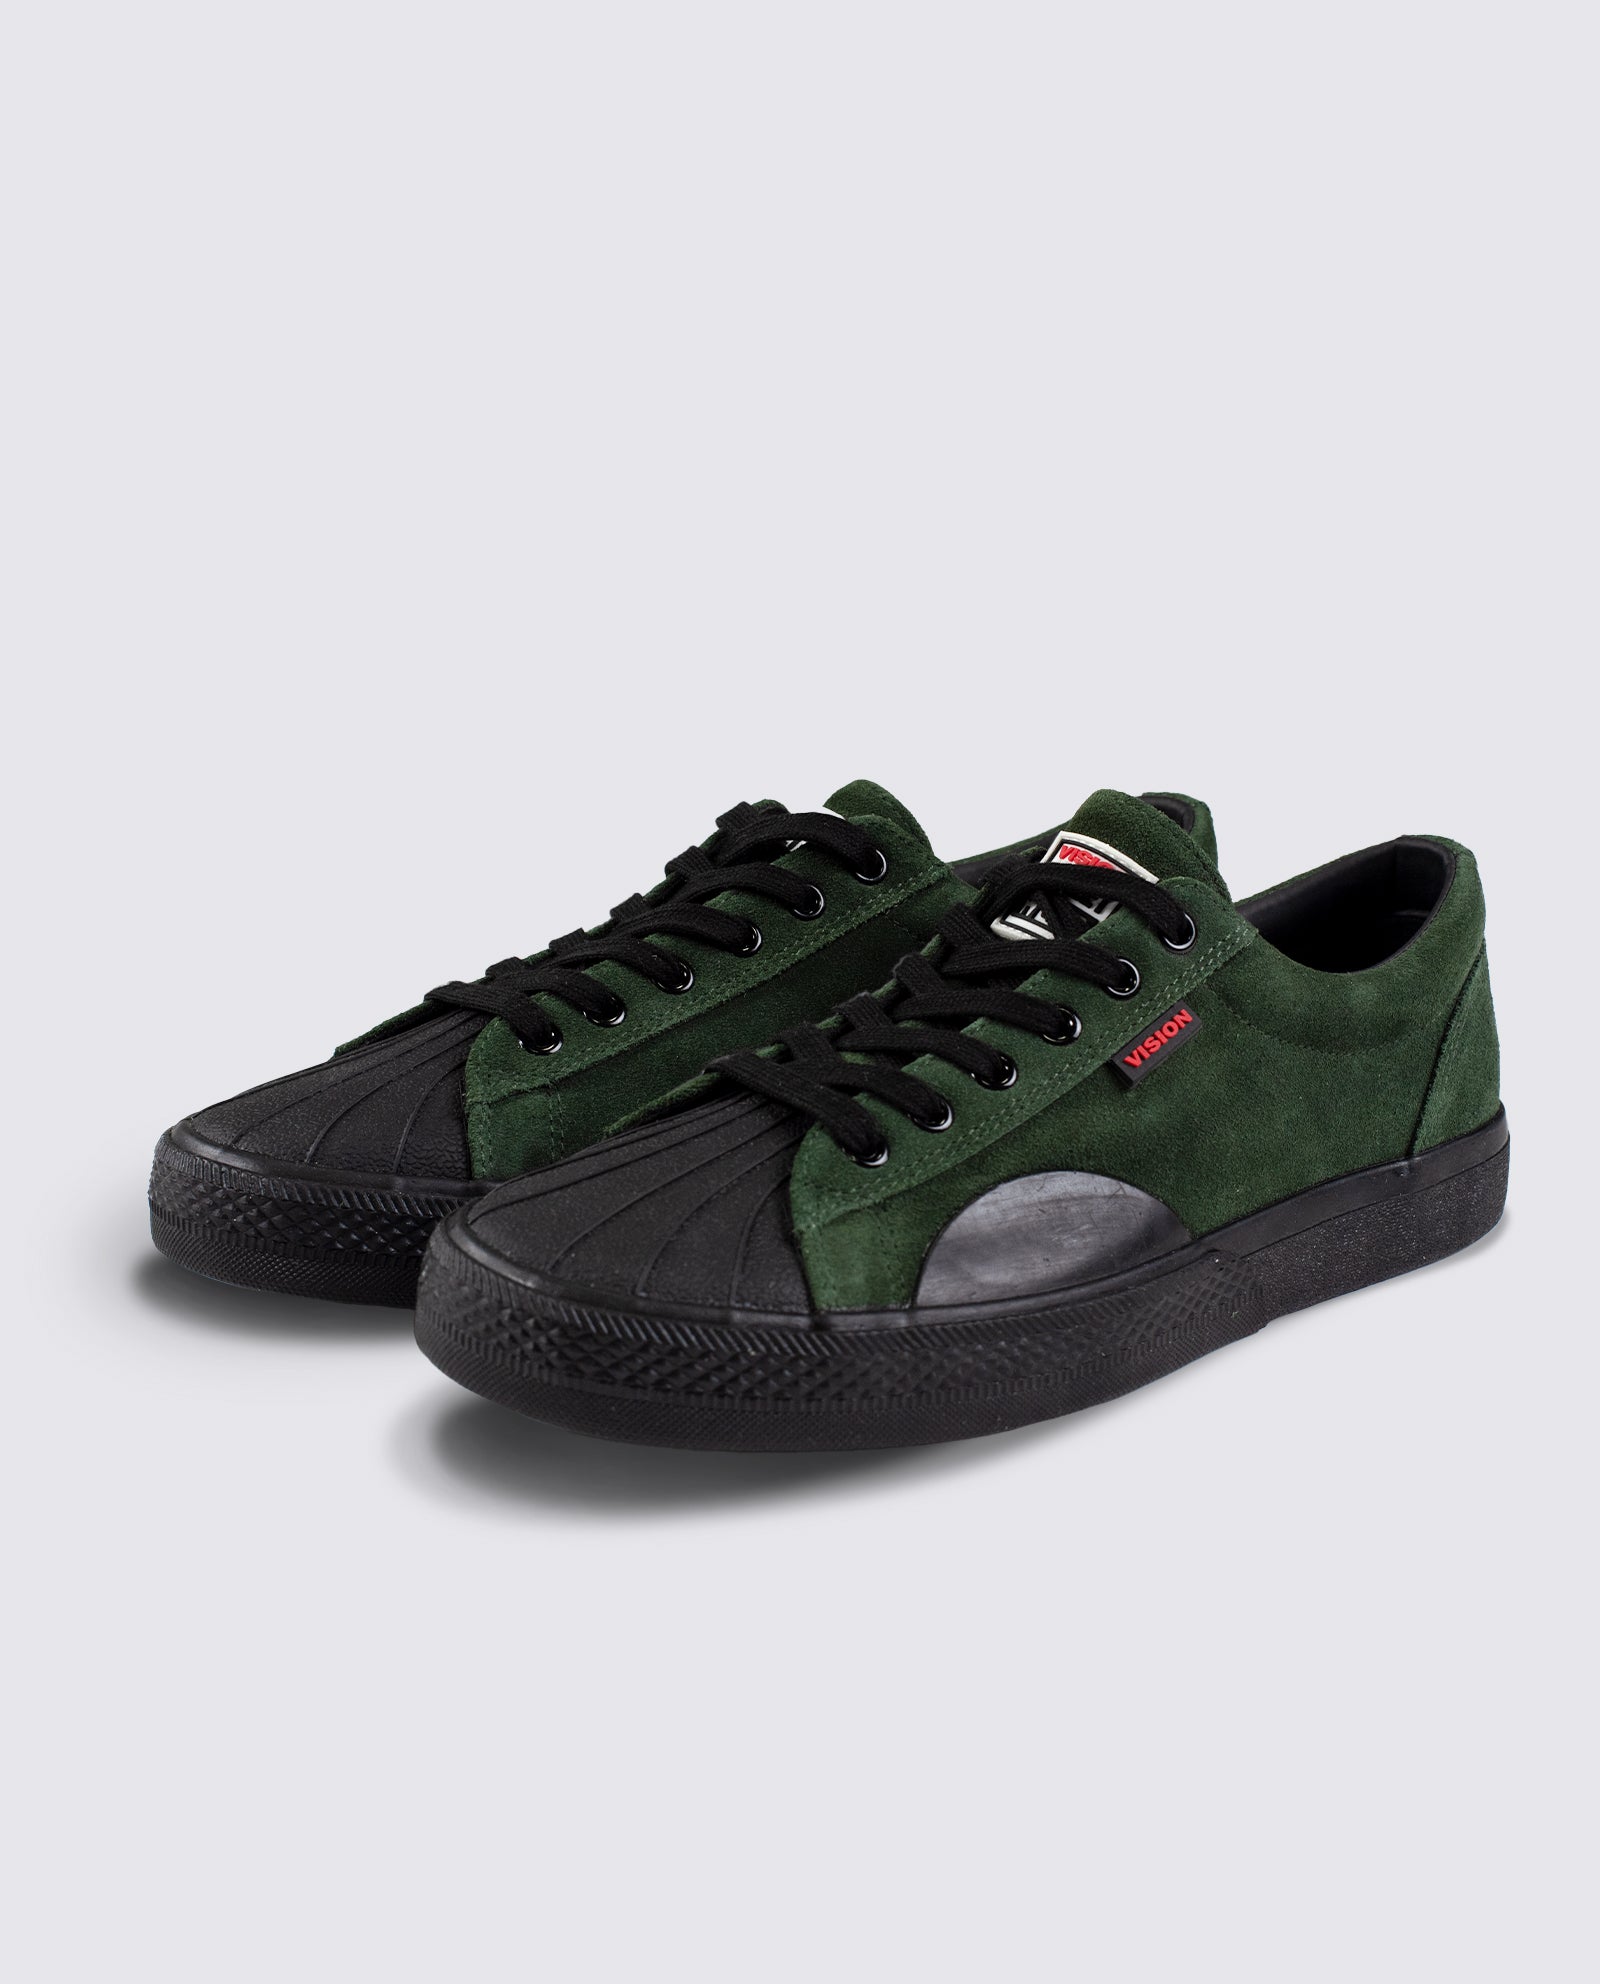 Vision Street Wear Leather Suede Low Top Skateboard Sneakers Army